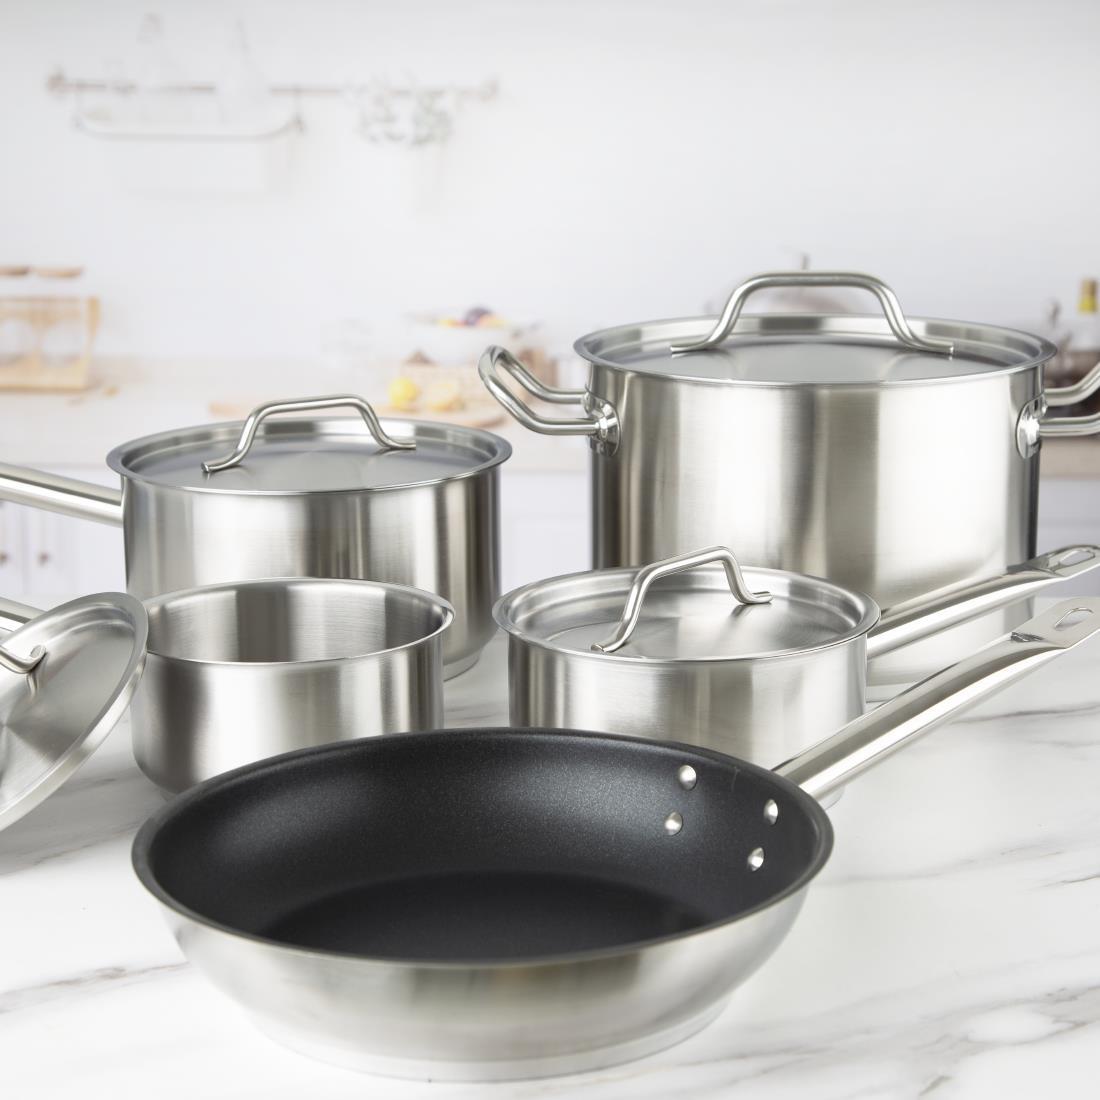 Vogue Cook Like A Pro 5-Piece Stainless Steel Induction Cookware Set